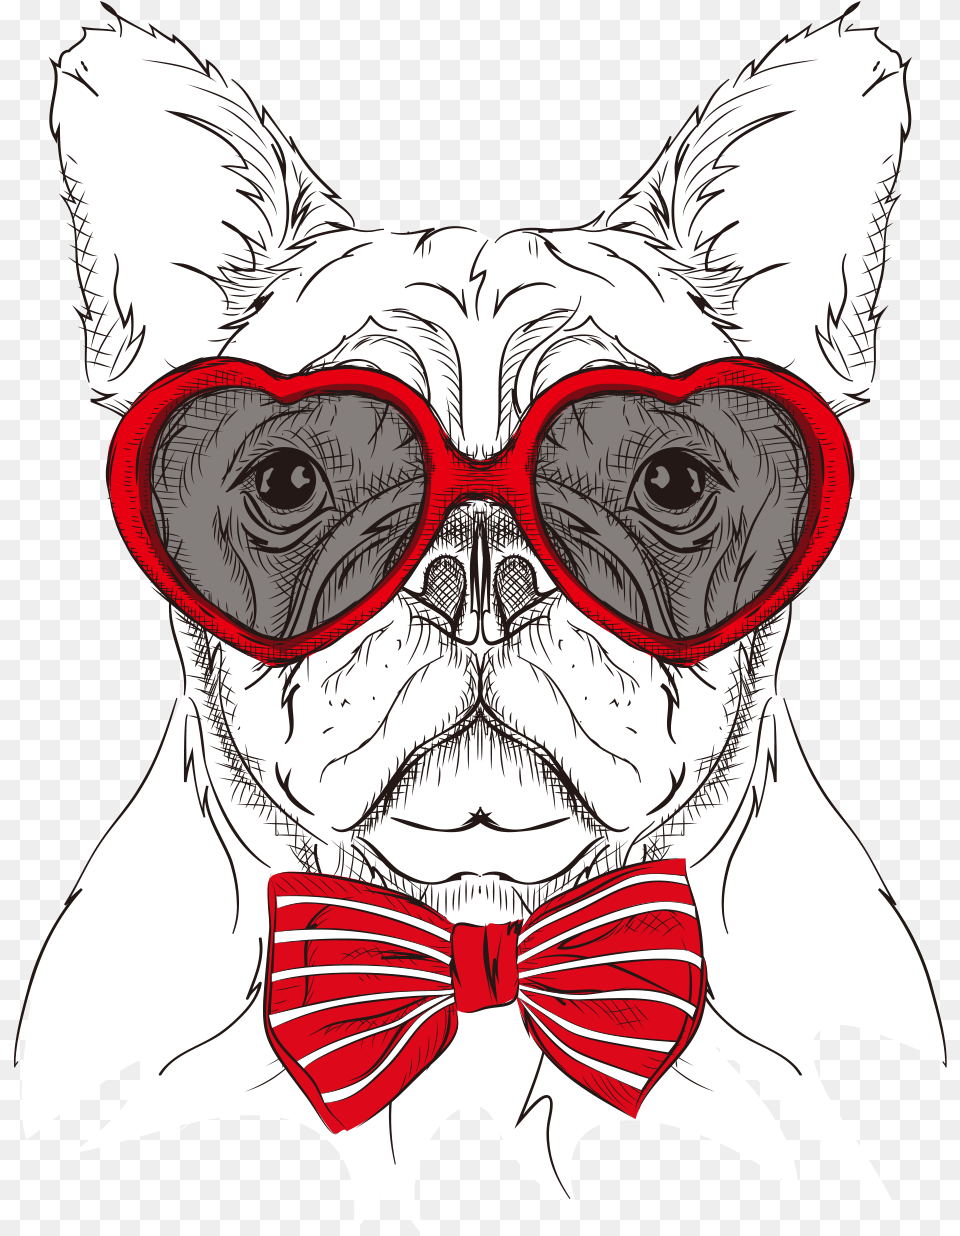 Cartoon Dog S Head Painted Glasses Bow Dog In Bowtie Clipart, Accessories, Sunglasses, Formal Wear, Tie Png